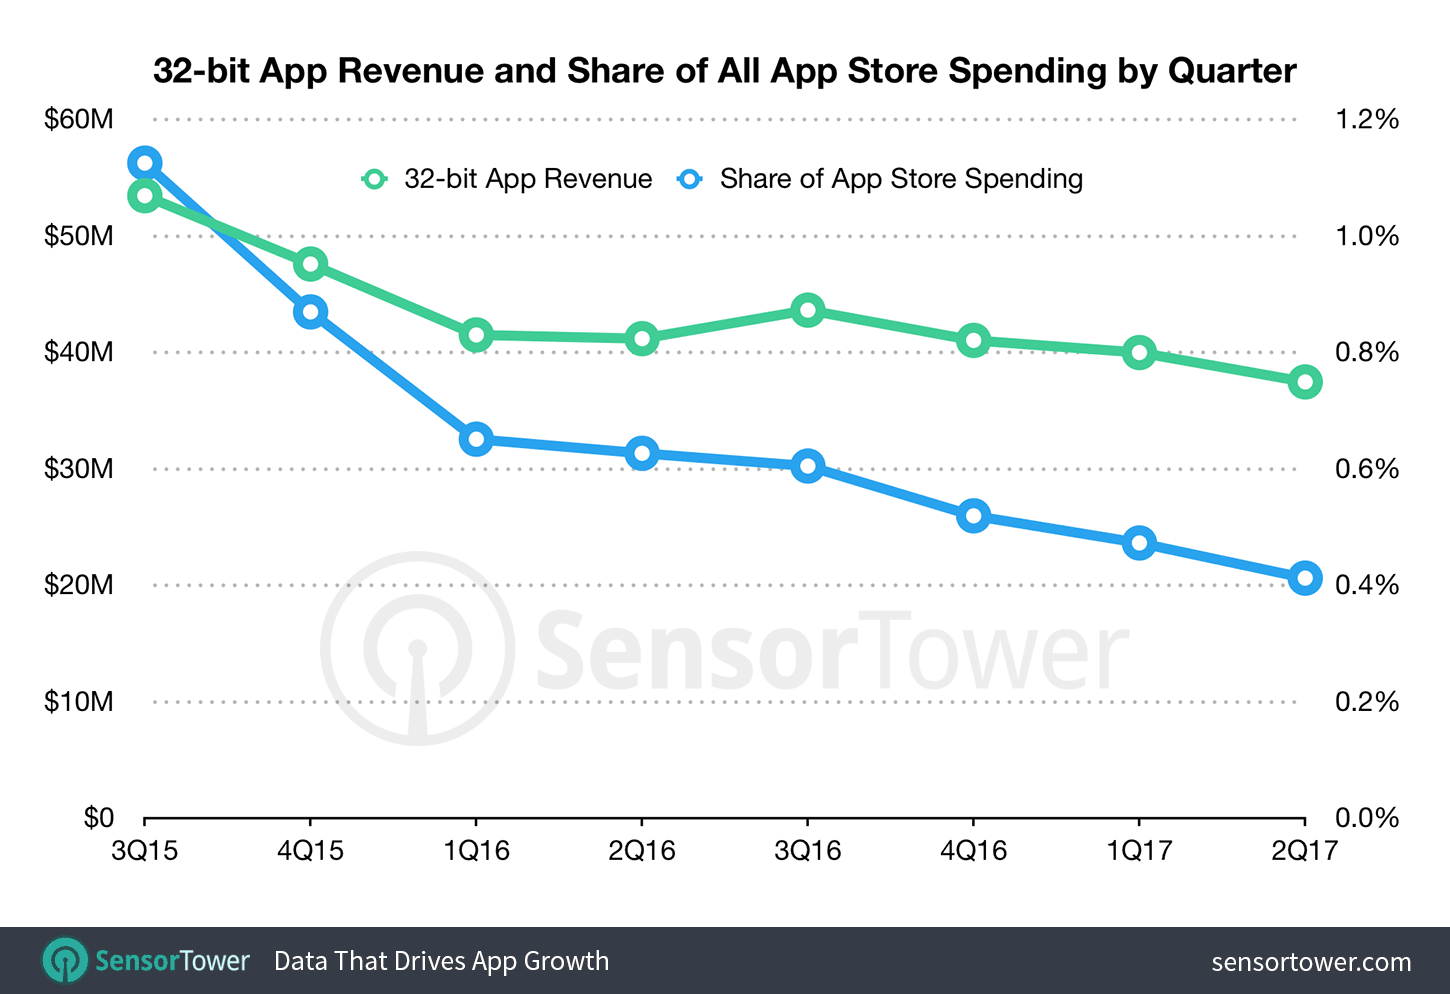 Worldwide quarterly revenue from 32-bit iOS apps with the share of total App Store revenue